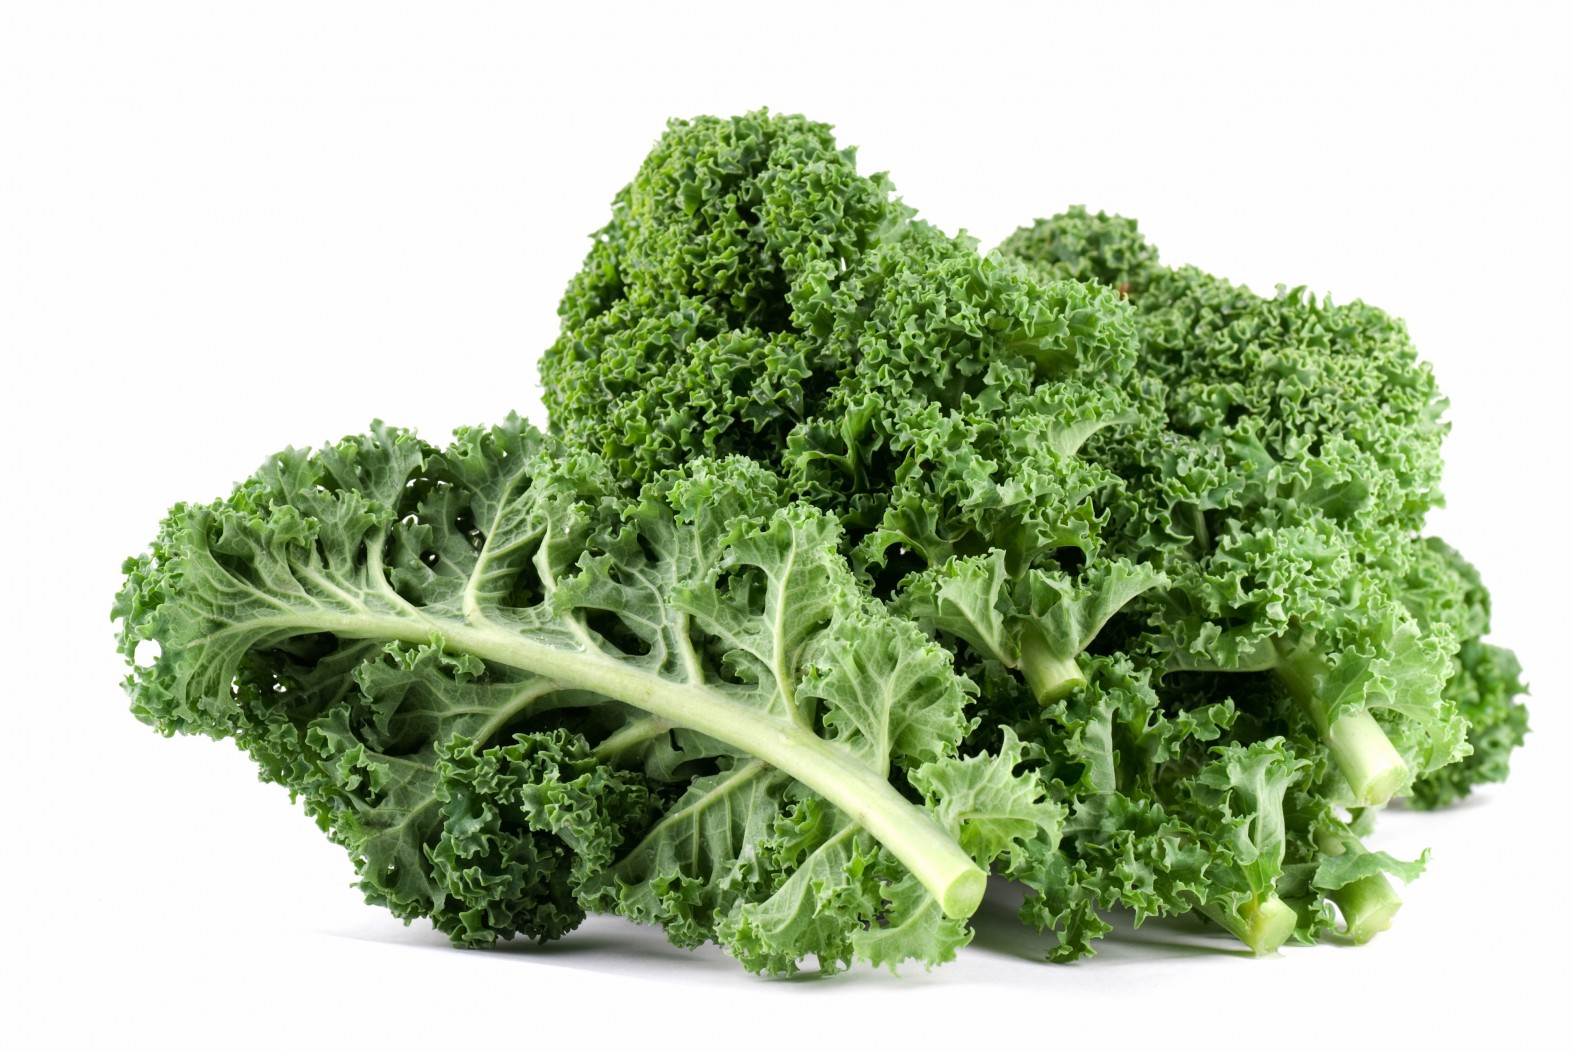 kale is a ‪#‎superfood‬.